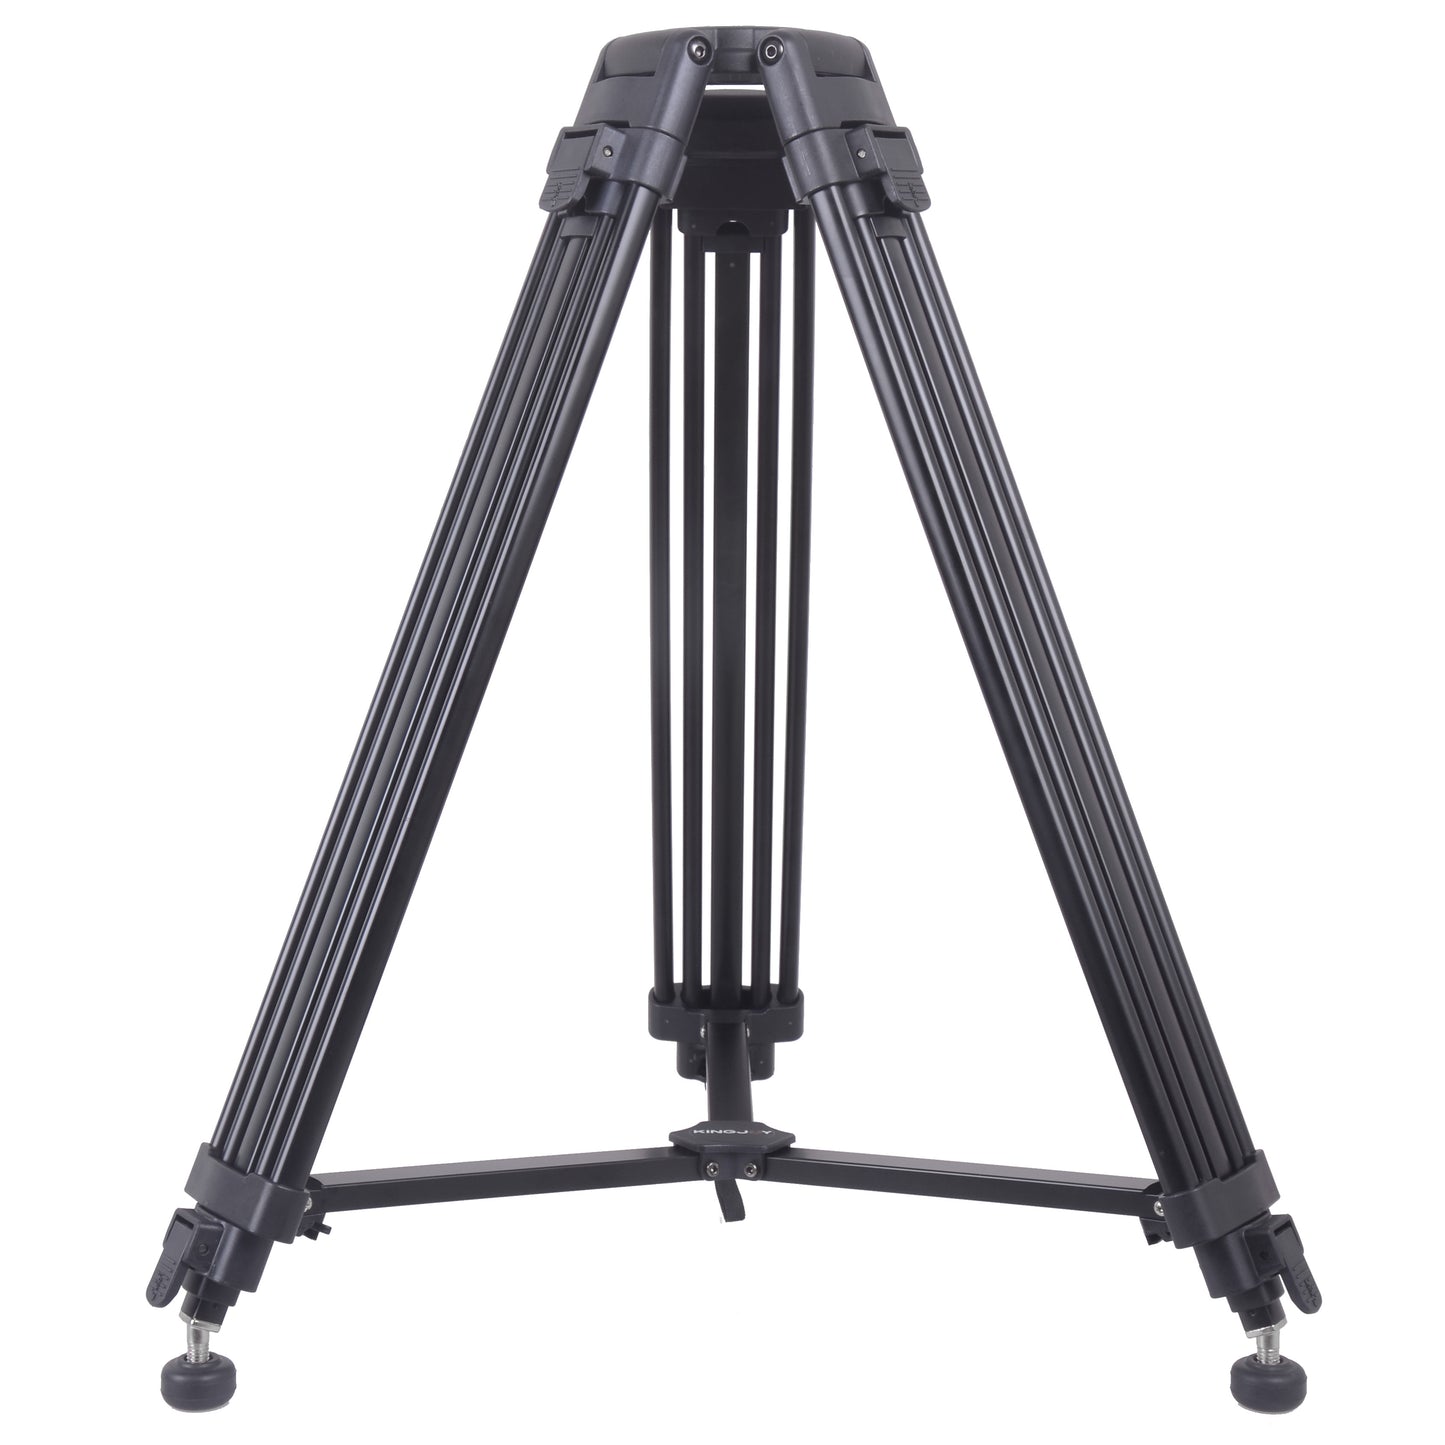 Kingjoy VT-2500 heavy-duty aluminum tripod-3 section,61in, 7.1lbs, with two kinds of fluid head options